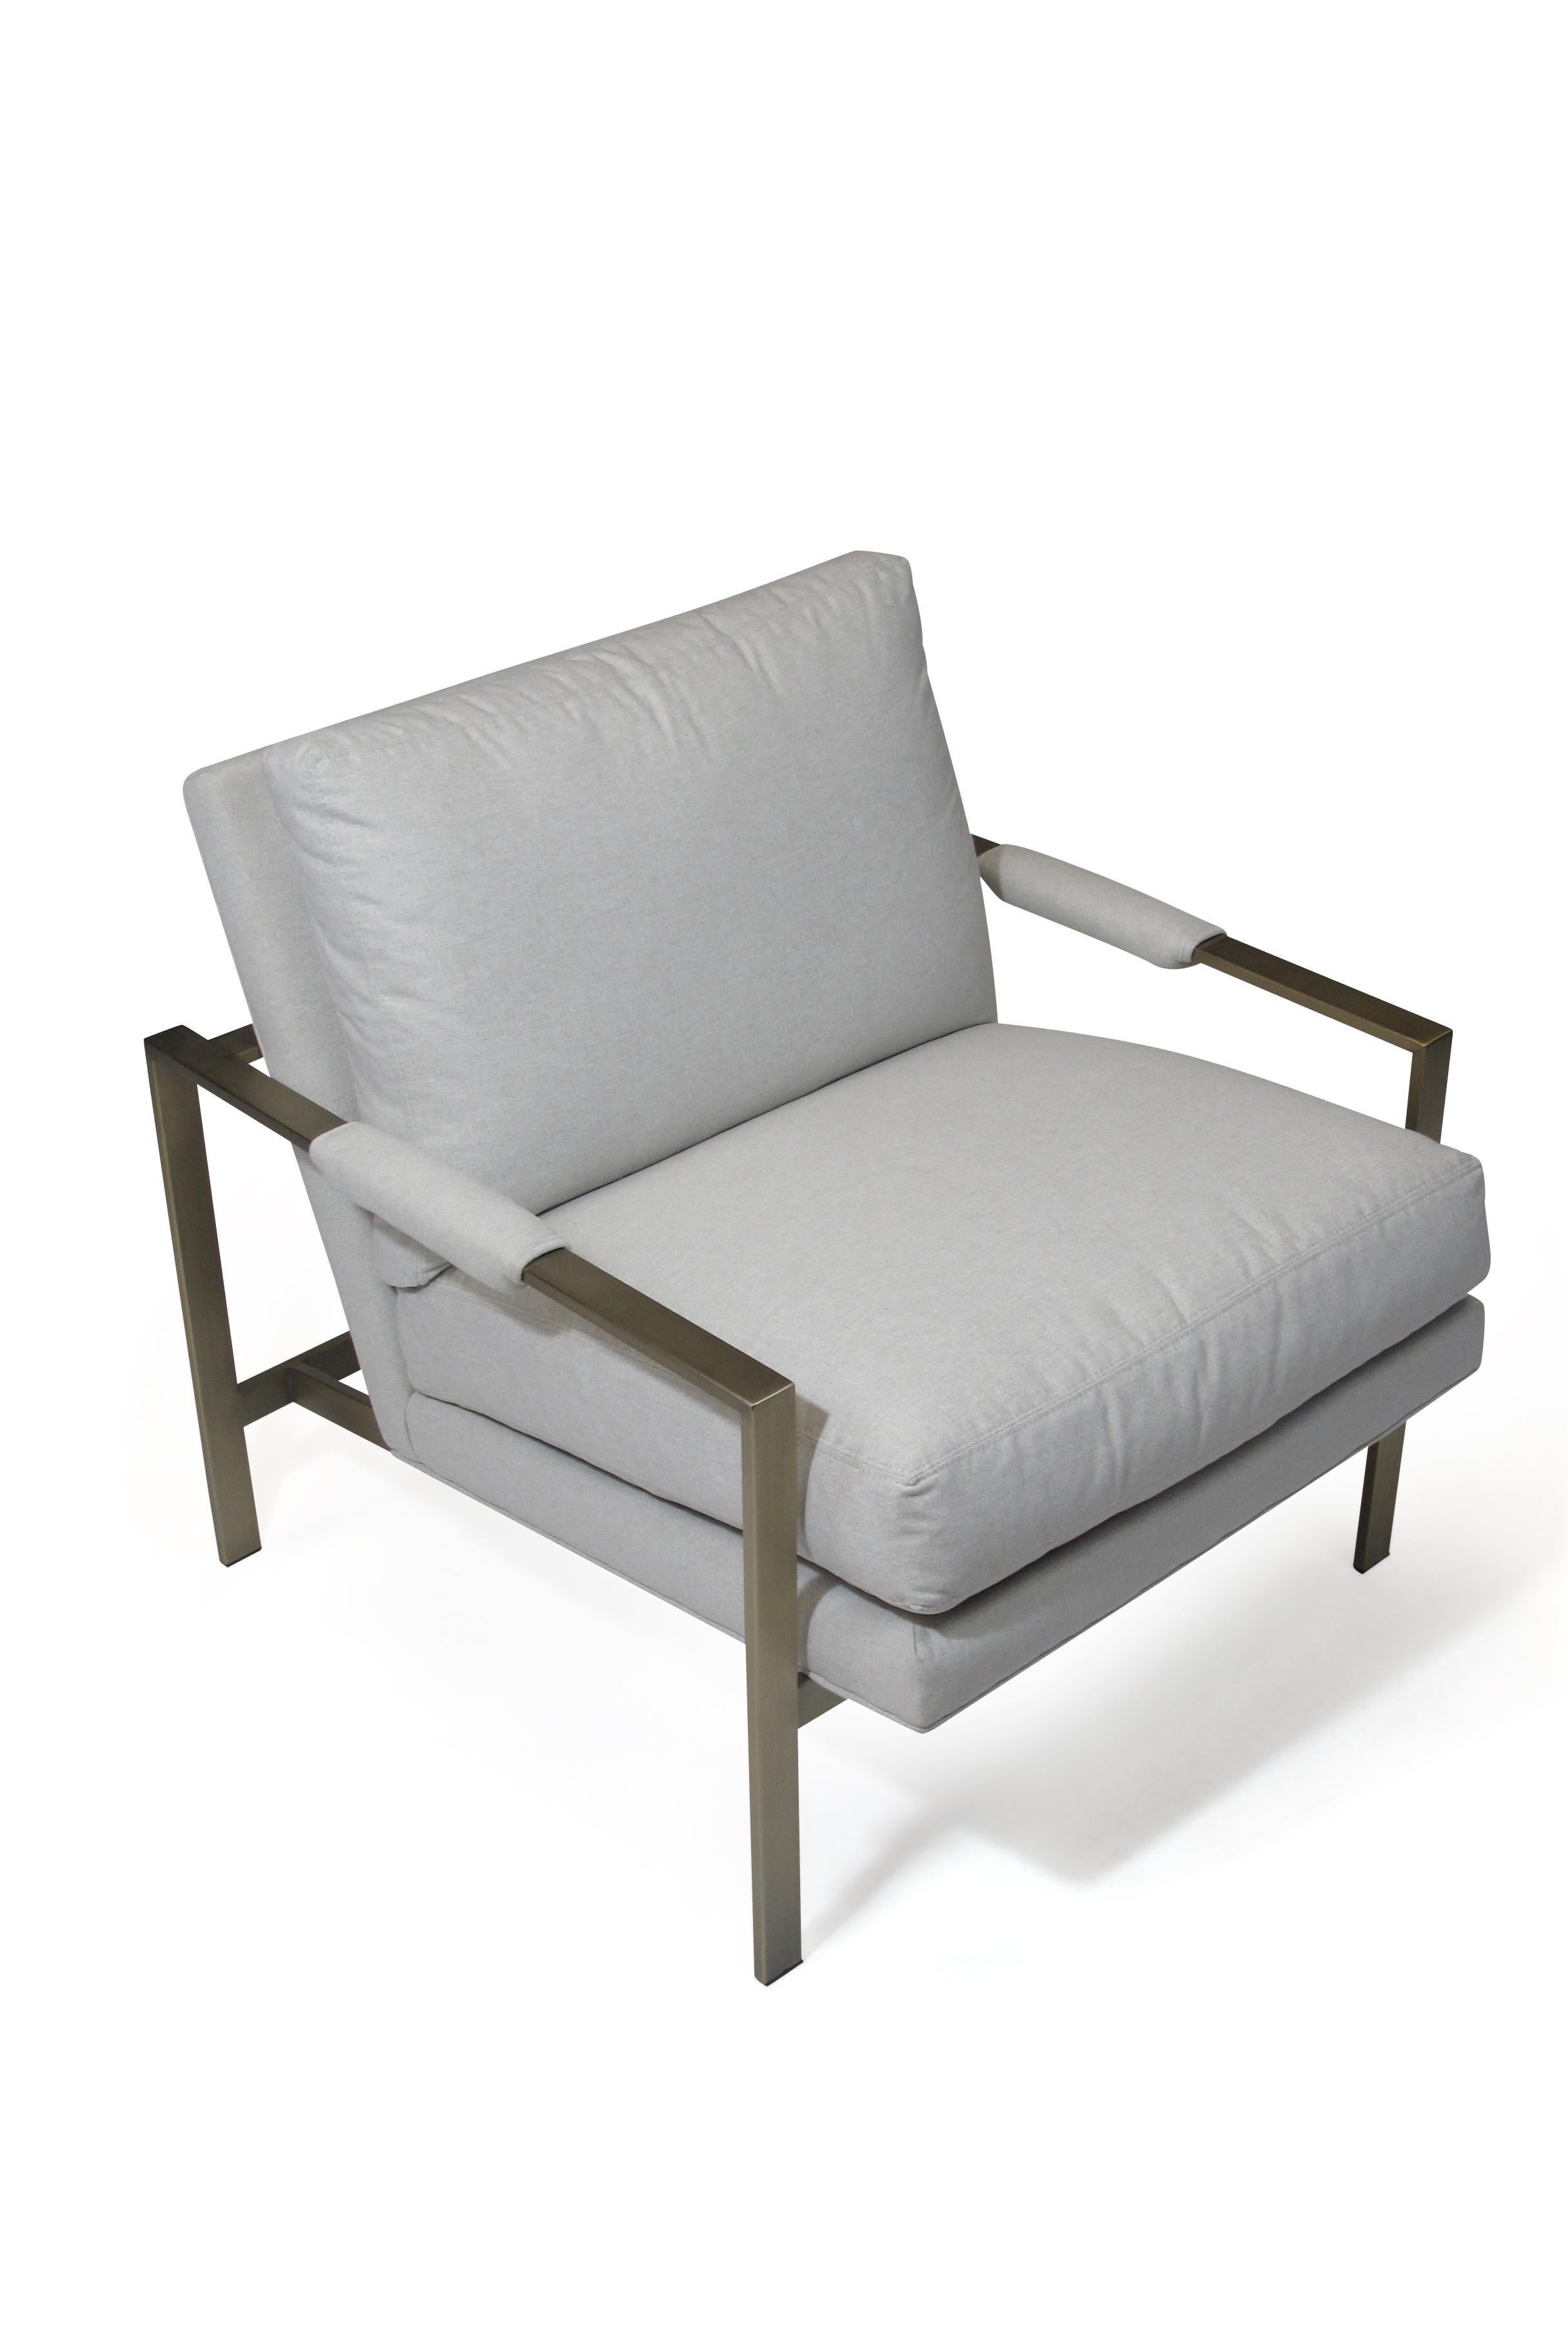 Midcentury Milo Baughman Brass Frame Lounge Chairs in Off-White Fabric For Sale 1